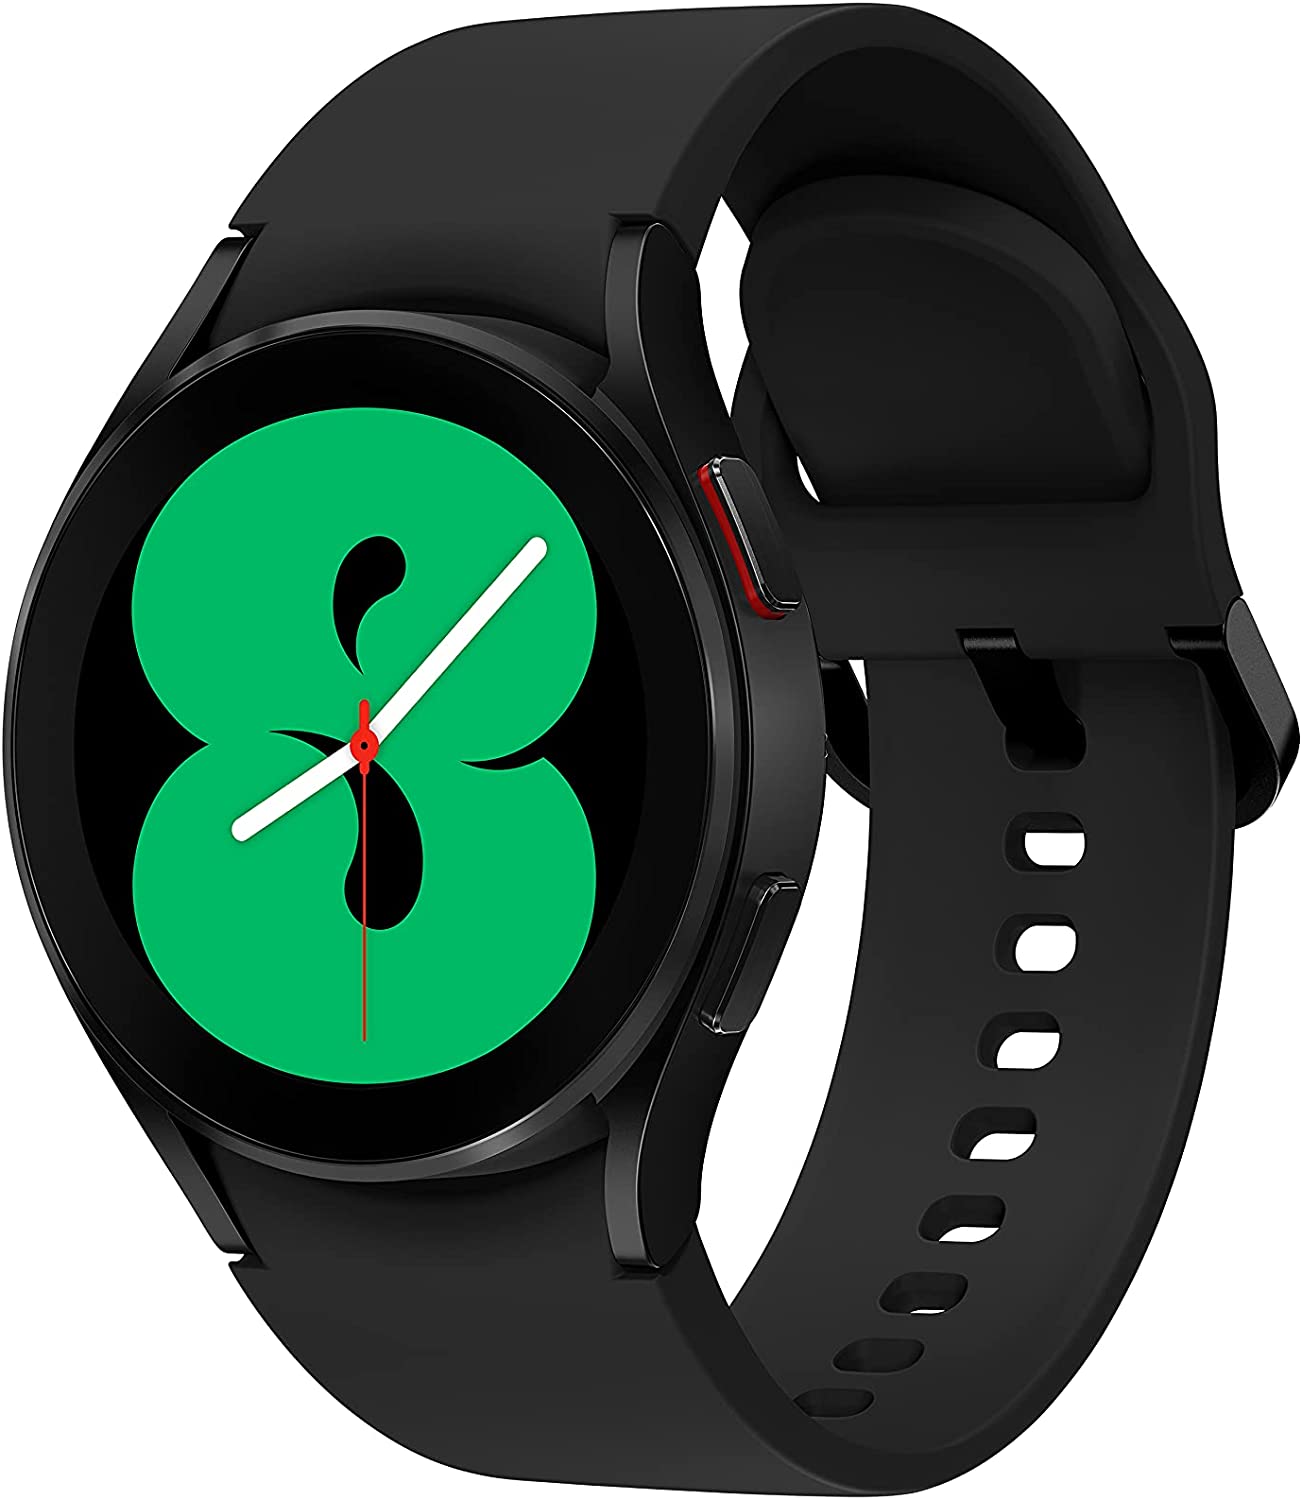 Samsung Galaxy Watch 4 40mm Smartwatch Color Black $179.99 with free shipping @Amazon